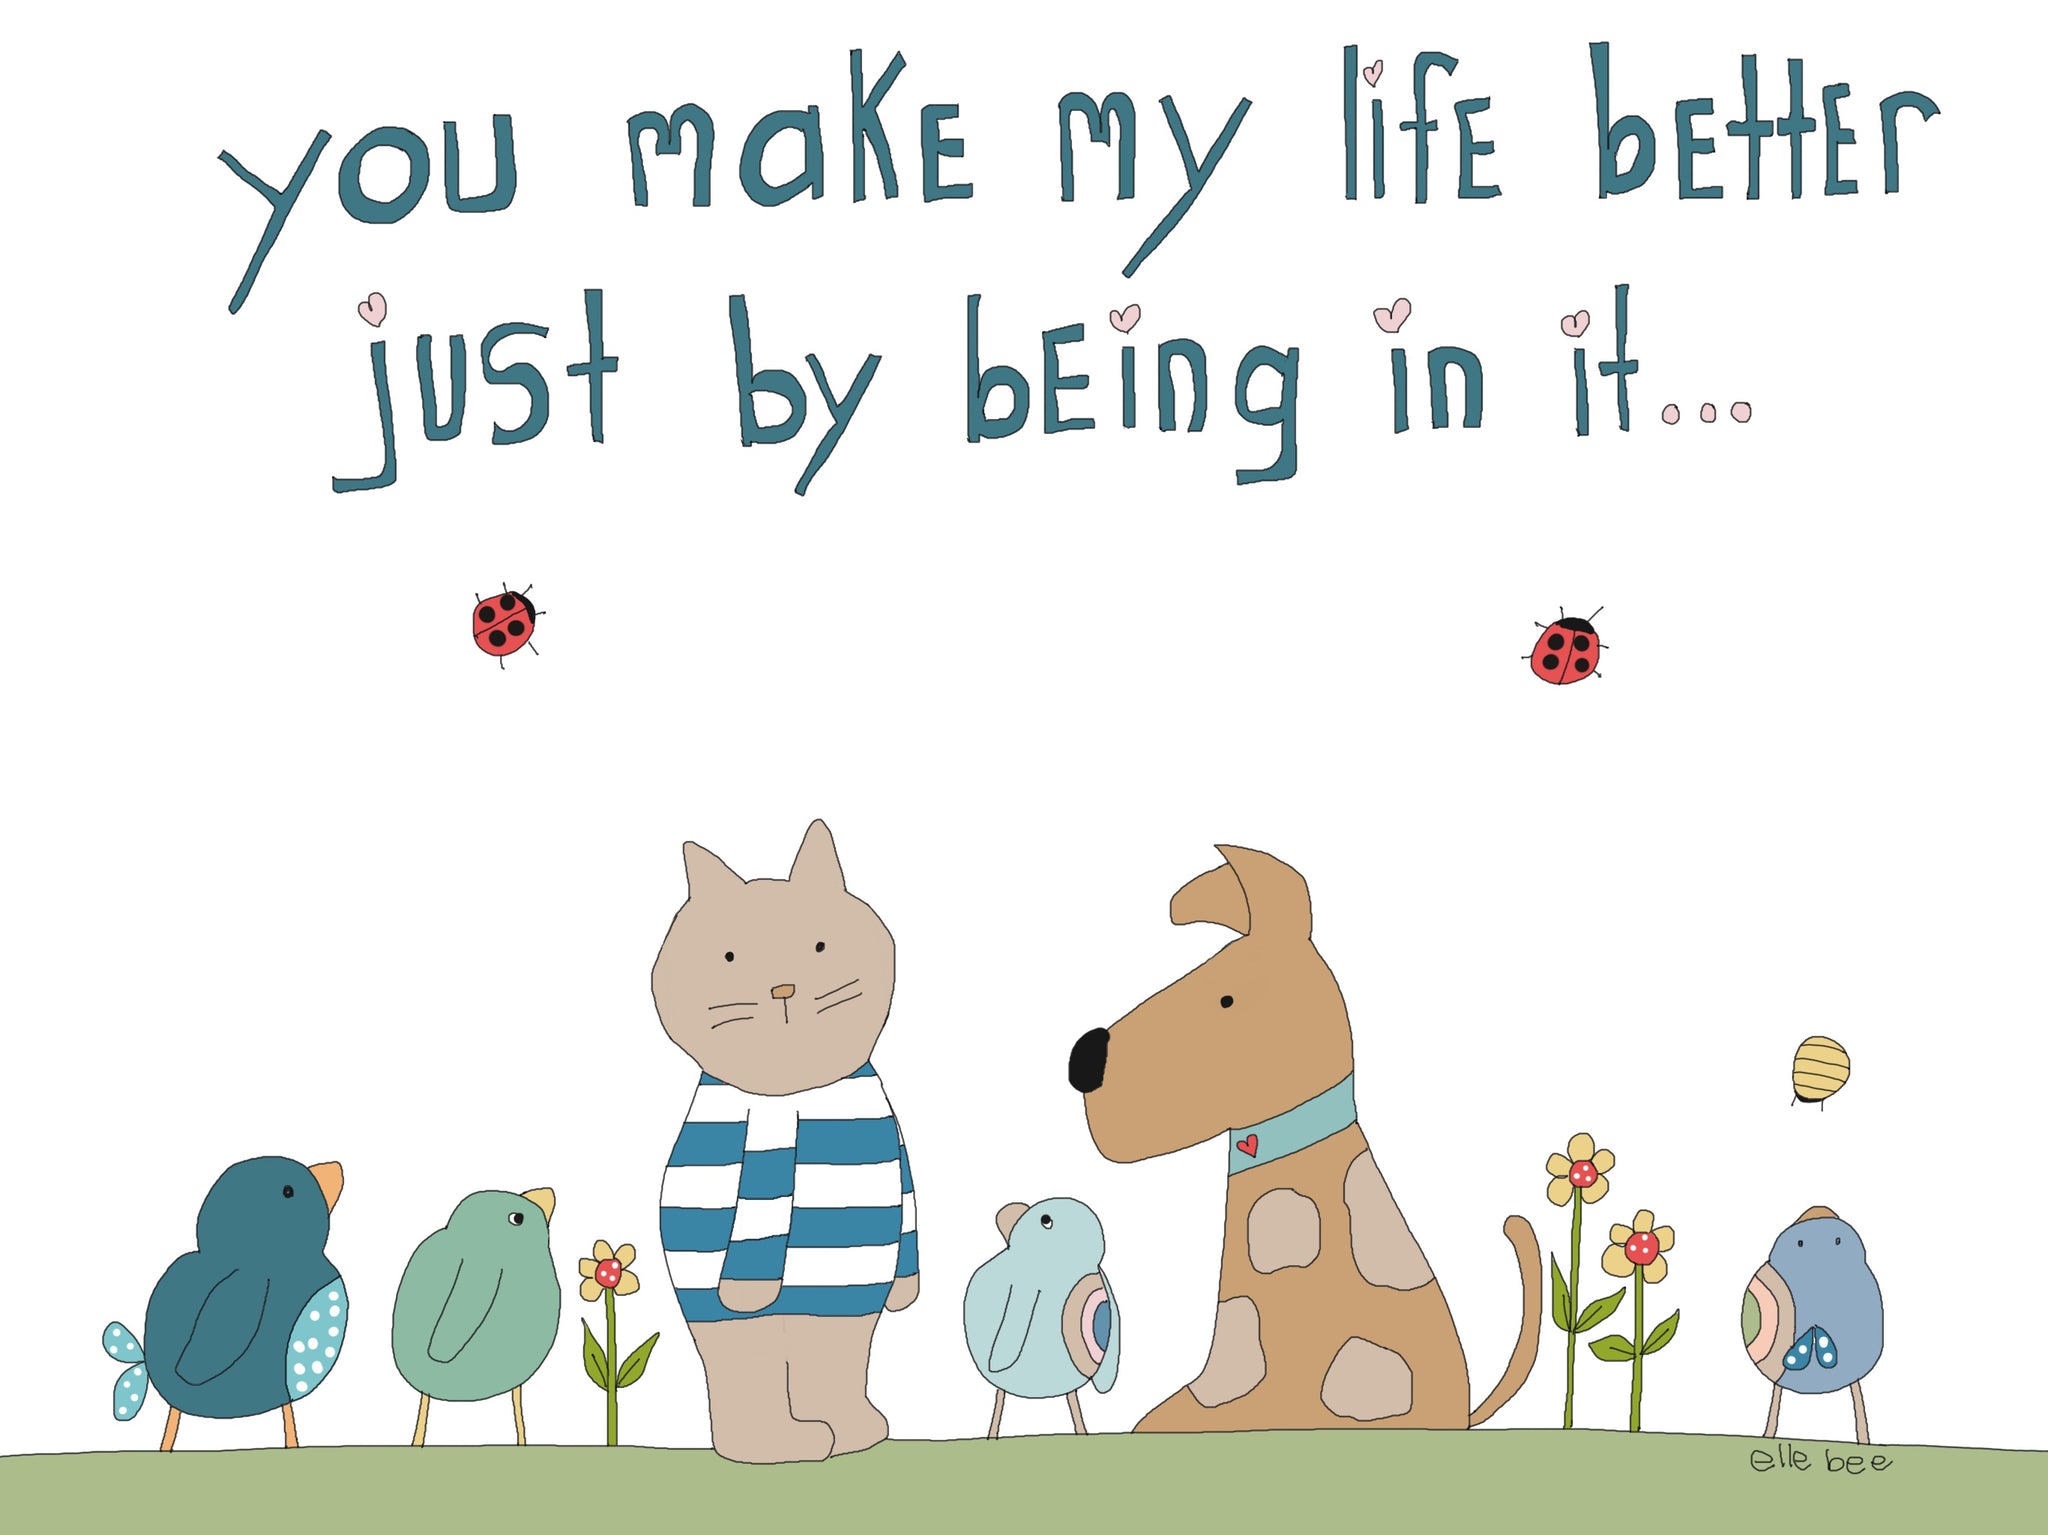 Greeting card “You make my life better…”